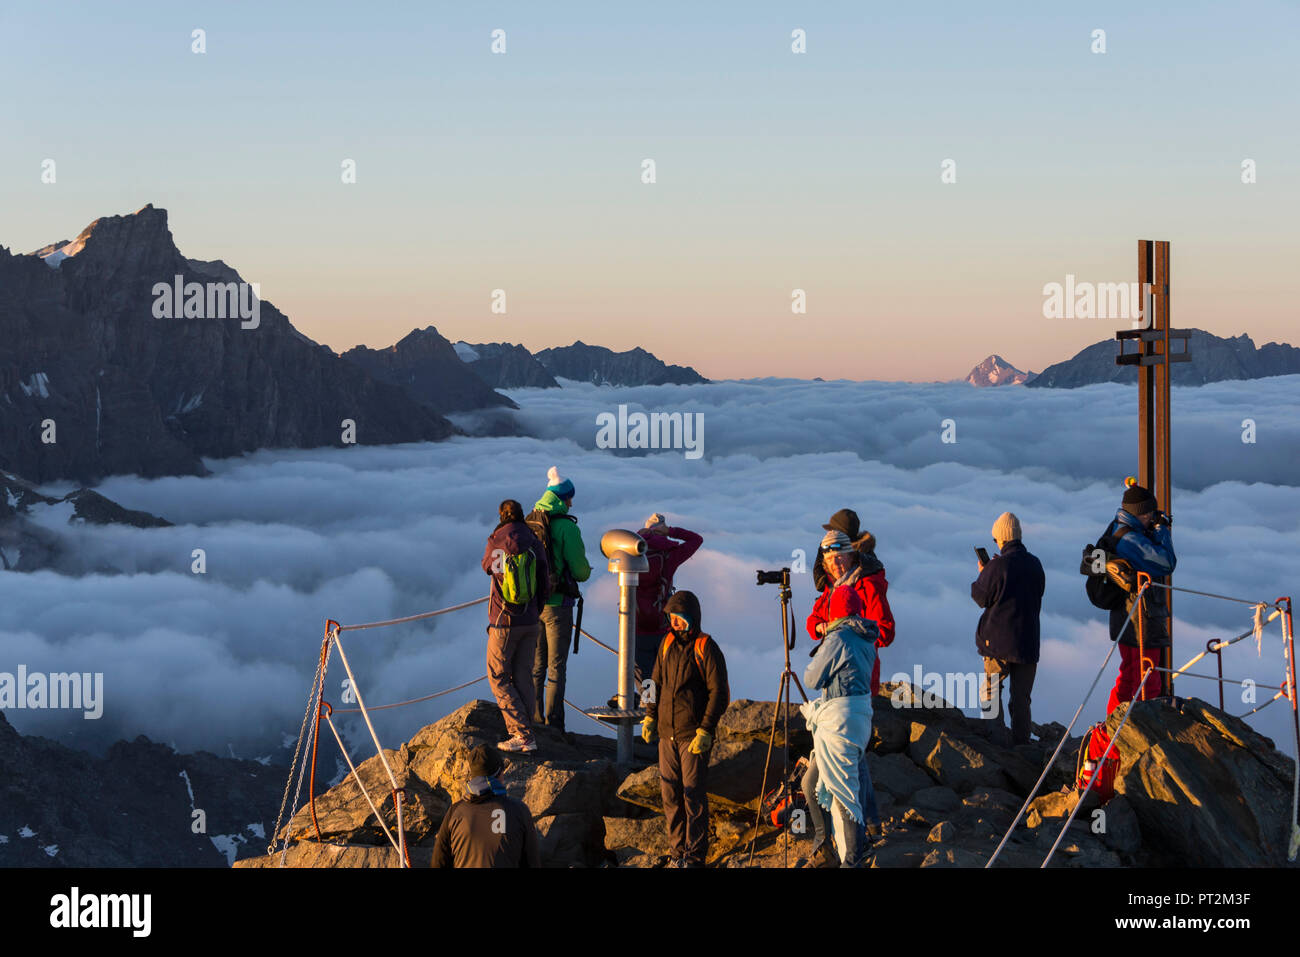 Switzerland, canton Valais, district Entremont, Verbier, sunrise, 3329 m high Mont-Fort, people enjoying the view Stock Photo